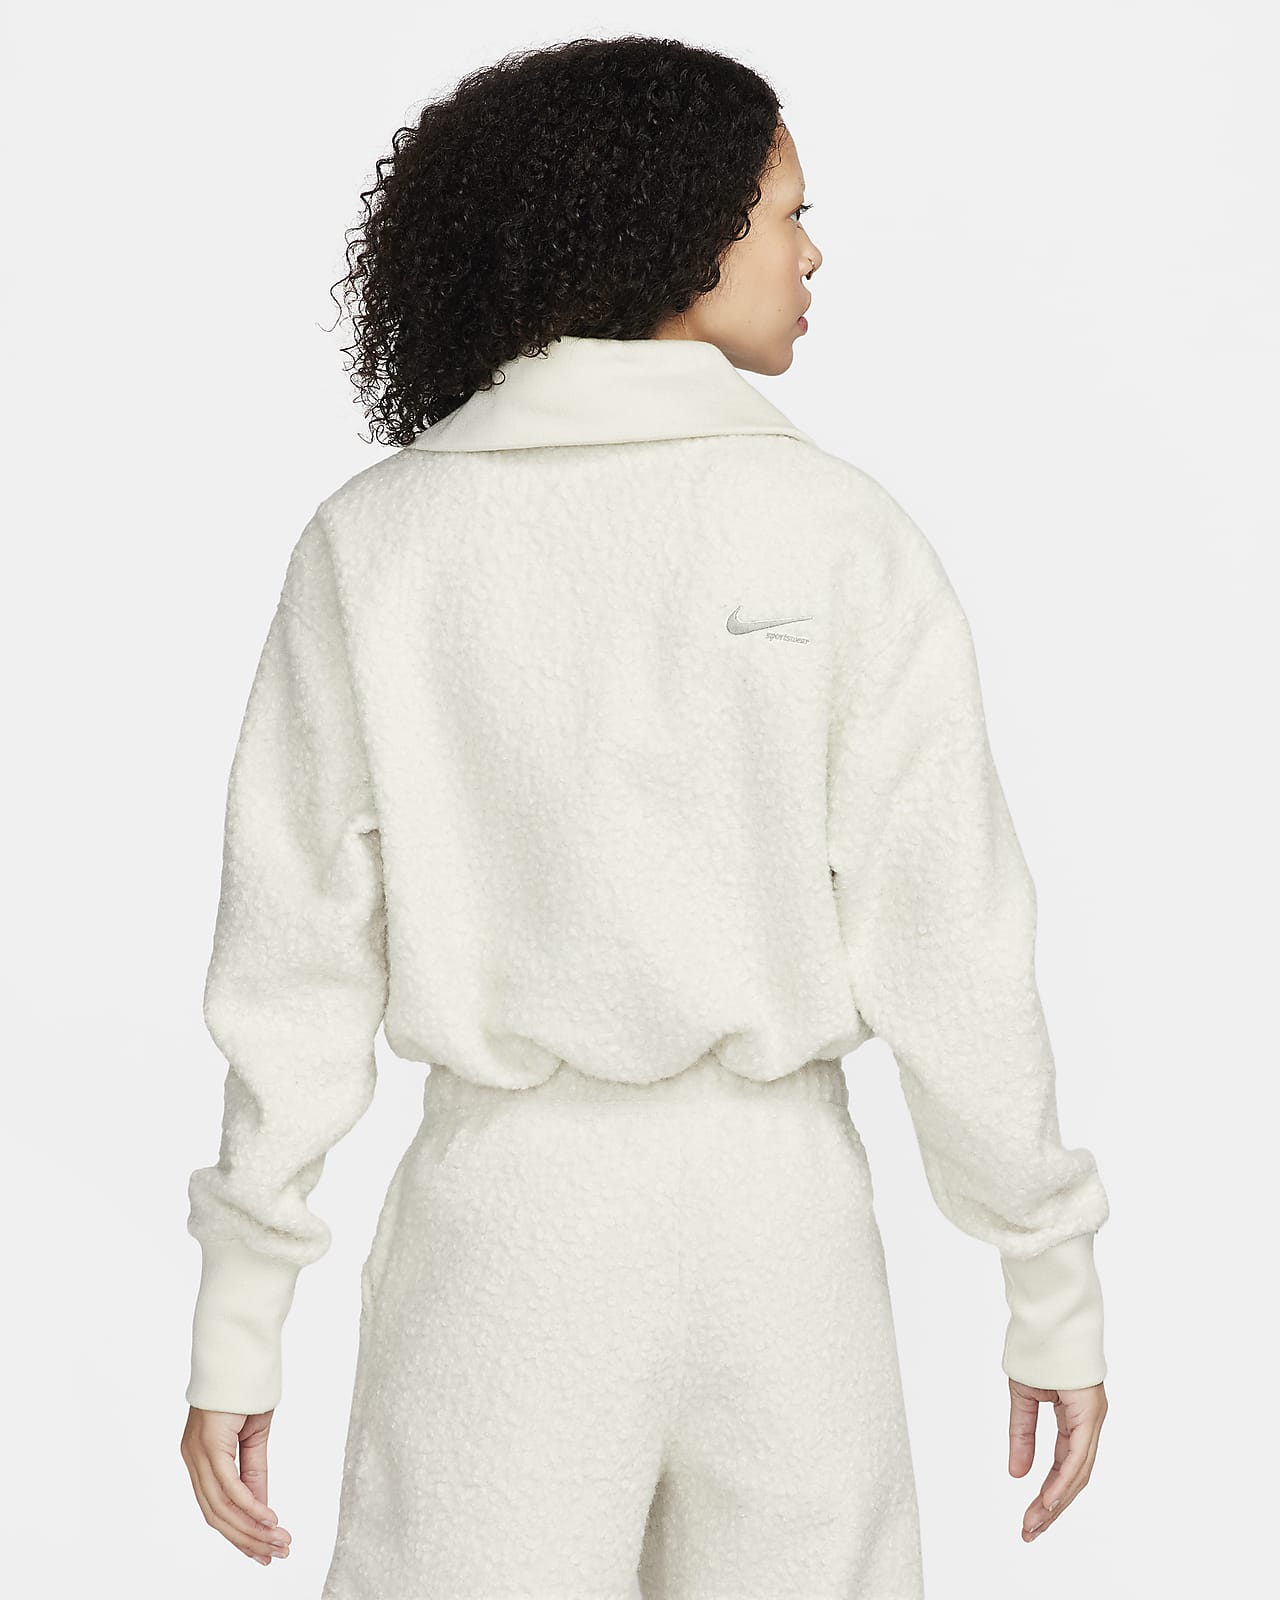 https://static.nike.com/a/images/t_PDP_1280_v1/f_auto,q_auto:eco/7459b18f-4f6a-4020-bf64-9235347b72f0/sportswear-collection-womens-high-pile-fleece-1-2-zip-top-FTpLmL.png